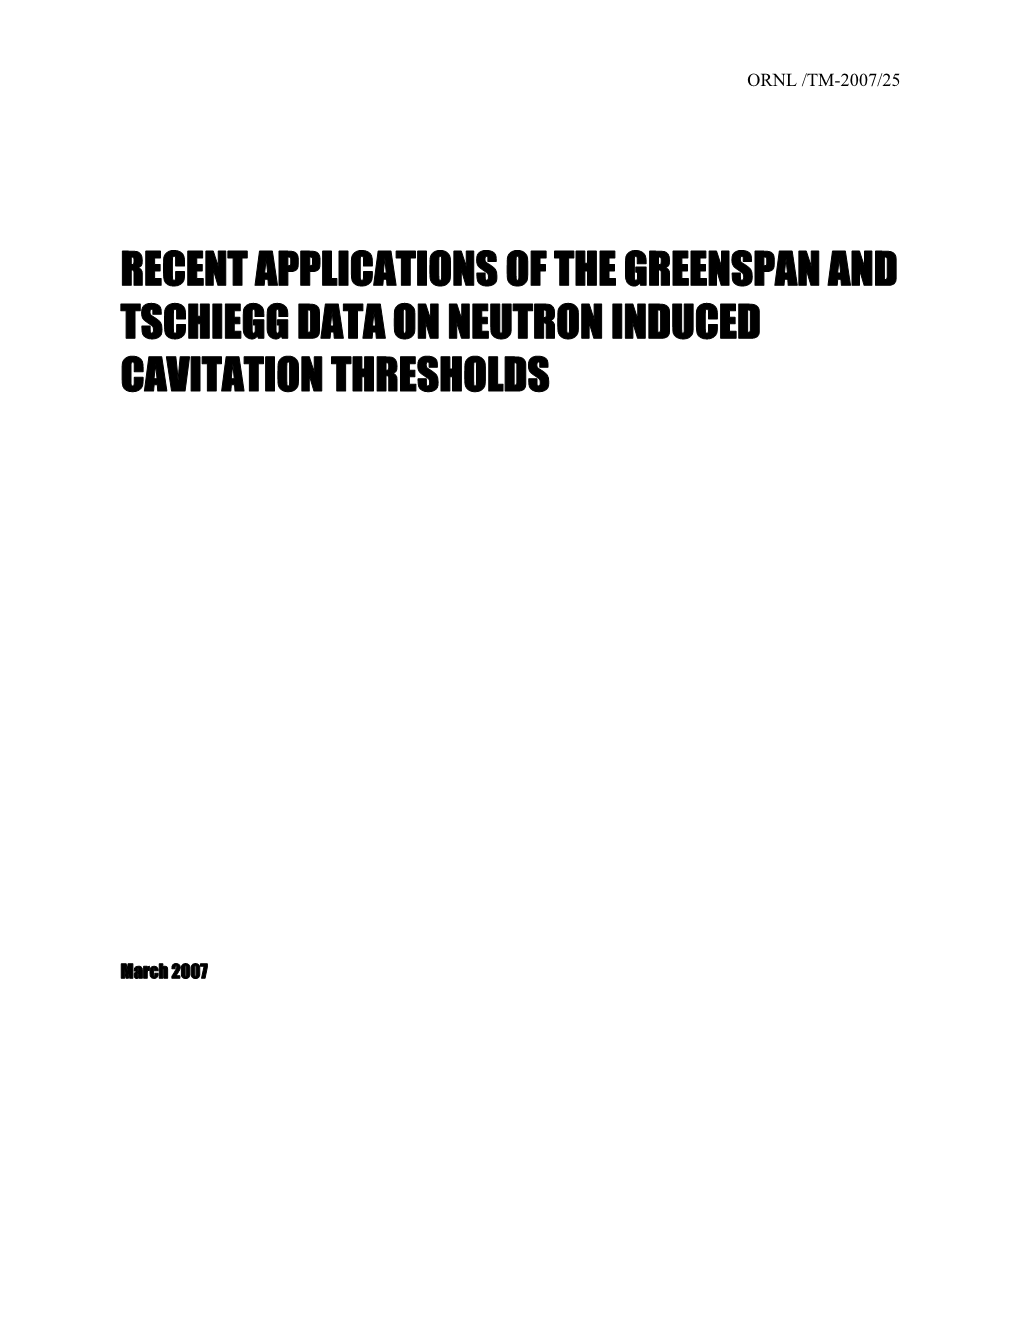 Recent Applications of the Greenspan and Tschiegg Data on Neutron Induced Cavitation Thresholds